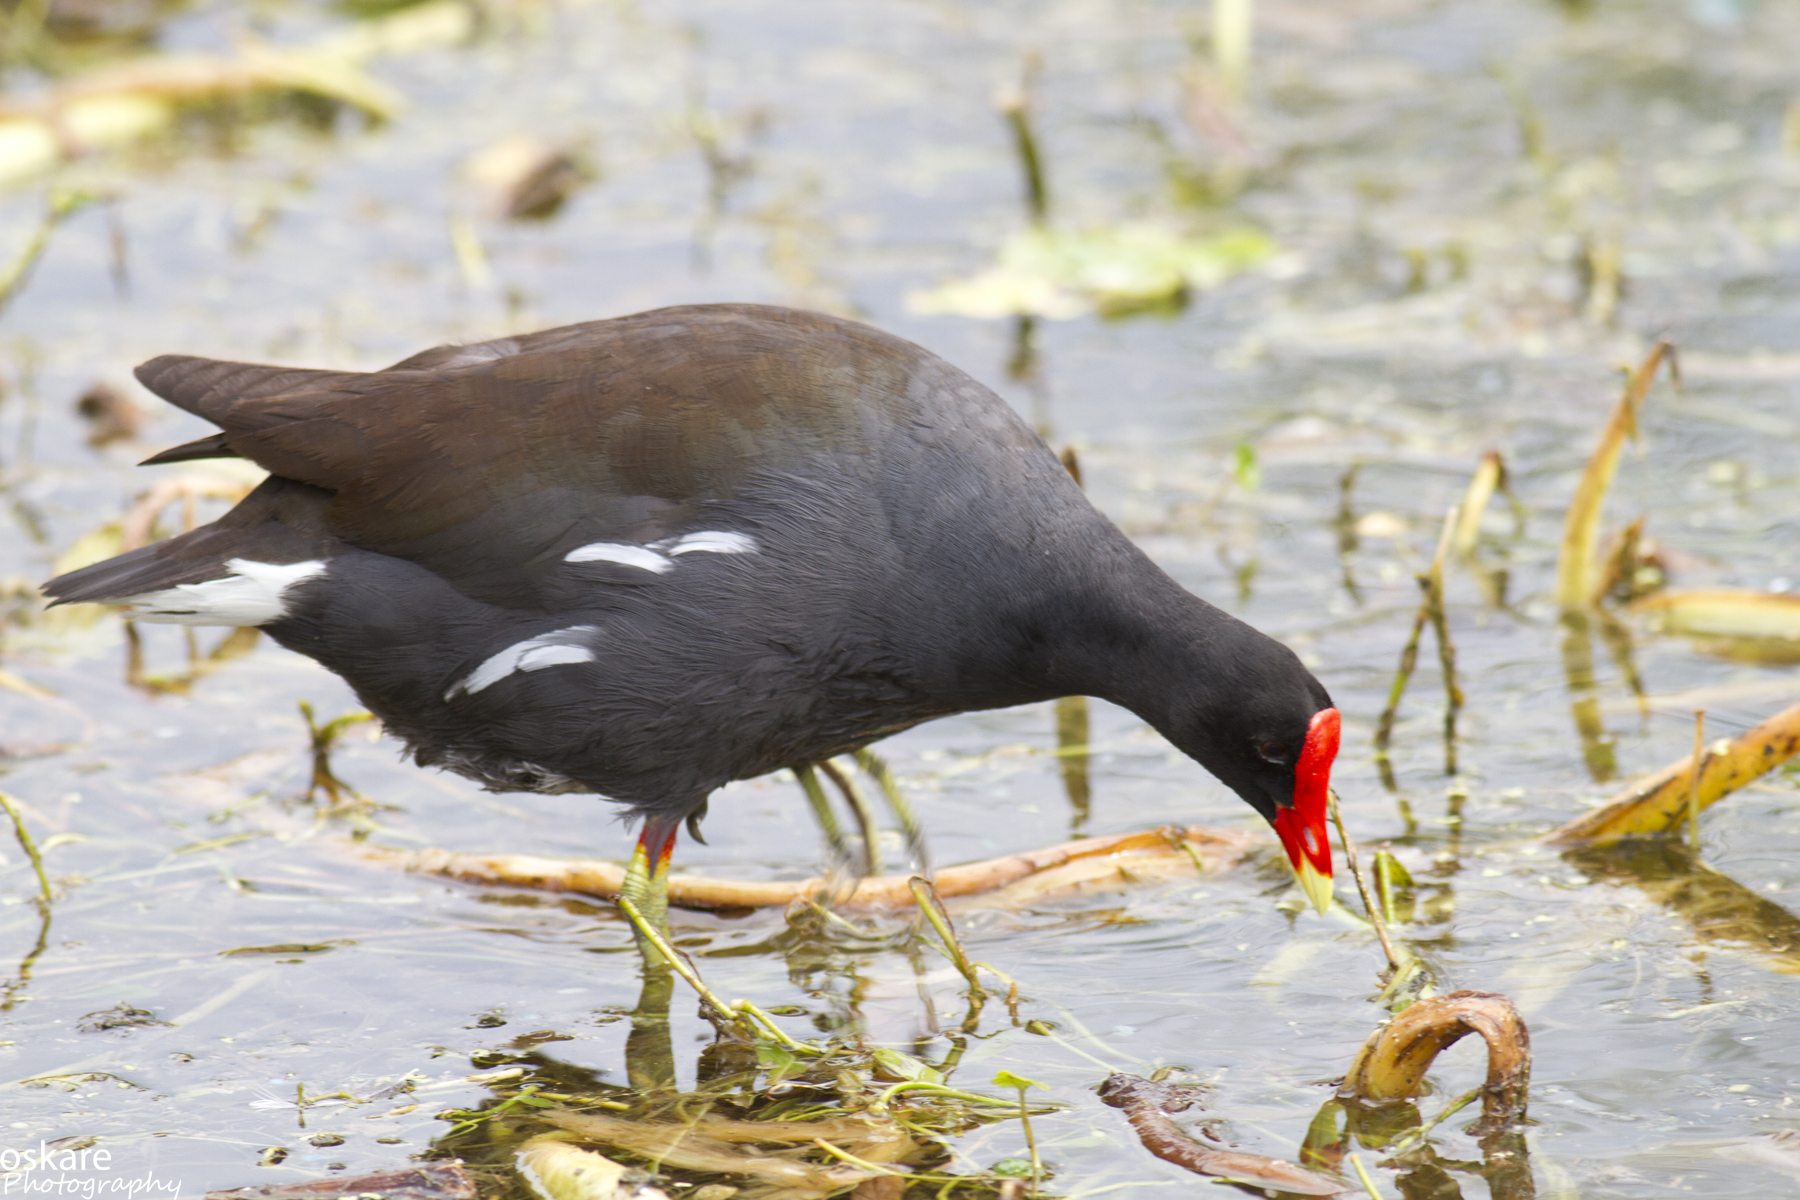 a bird with long legs bent down drinking from a dle